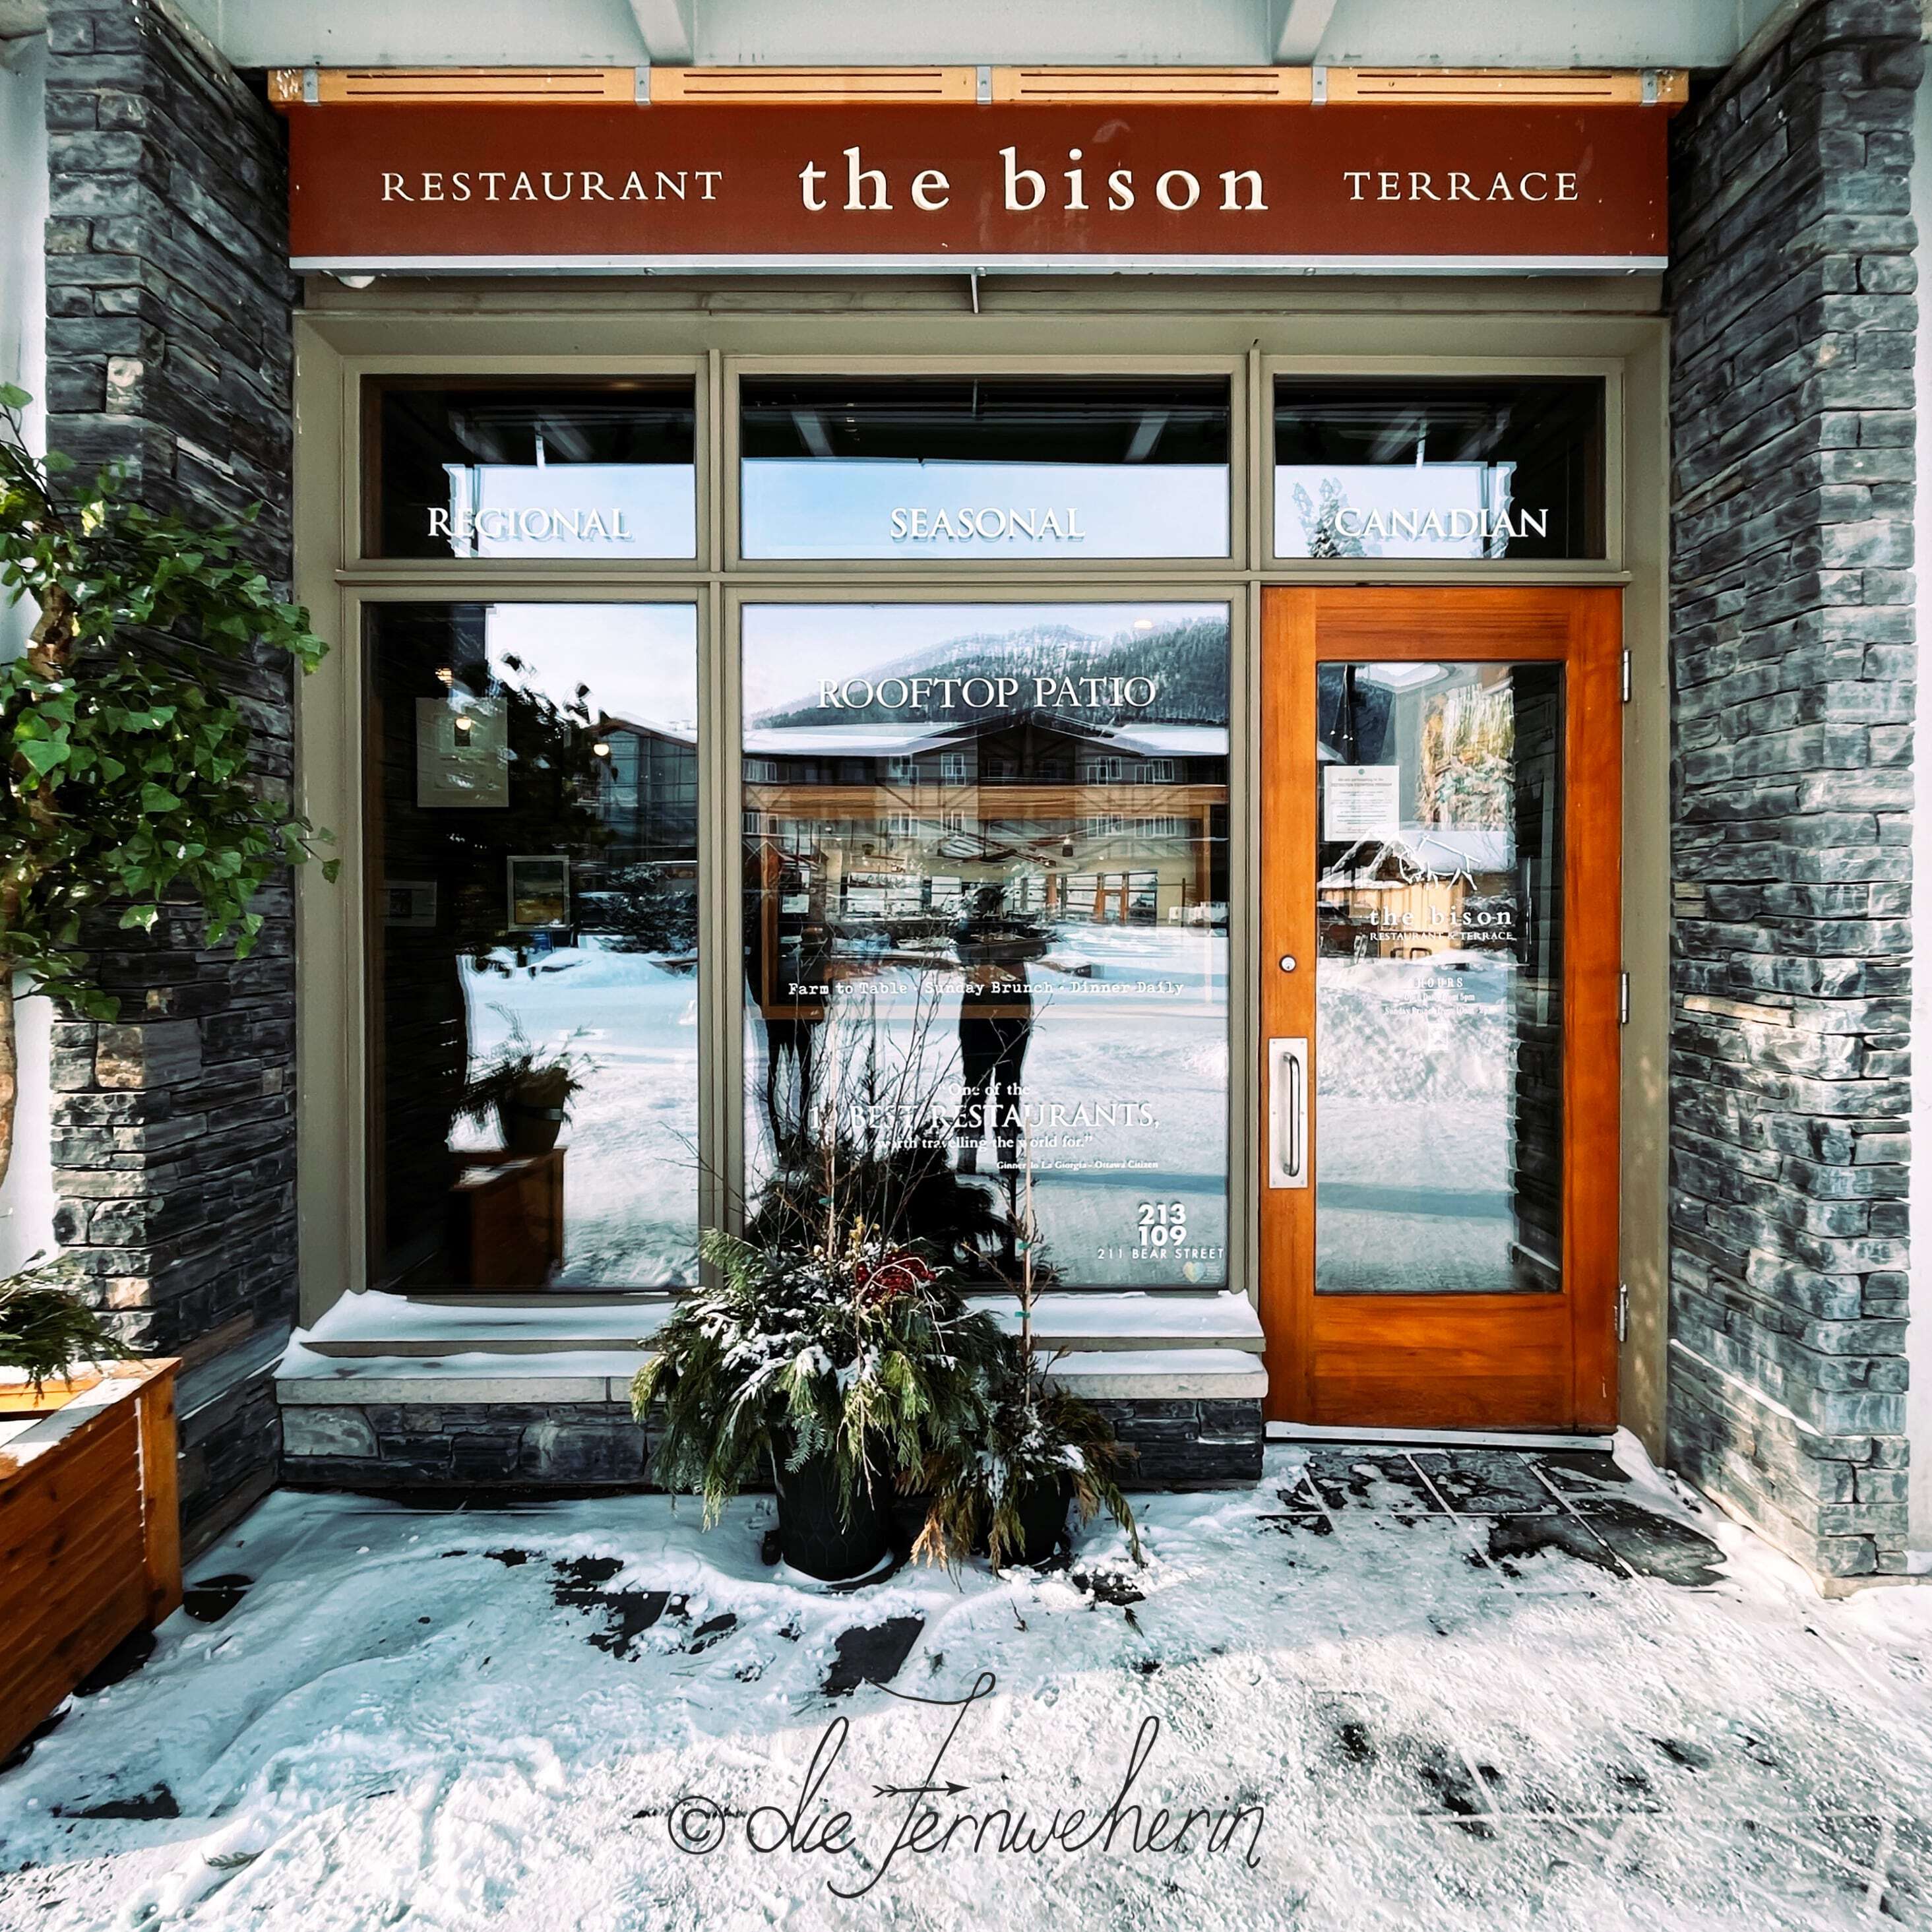 Exterior view of The Bison, a restaurant in the town of Banff.